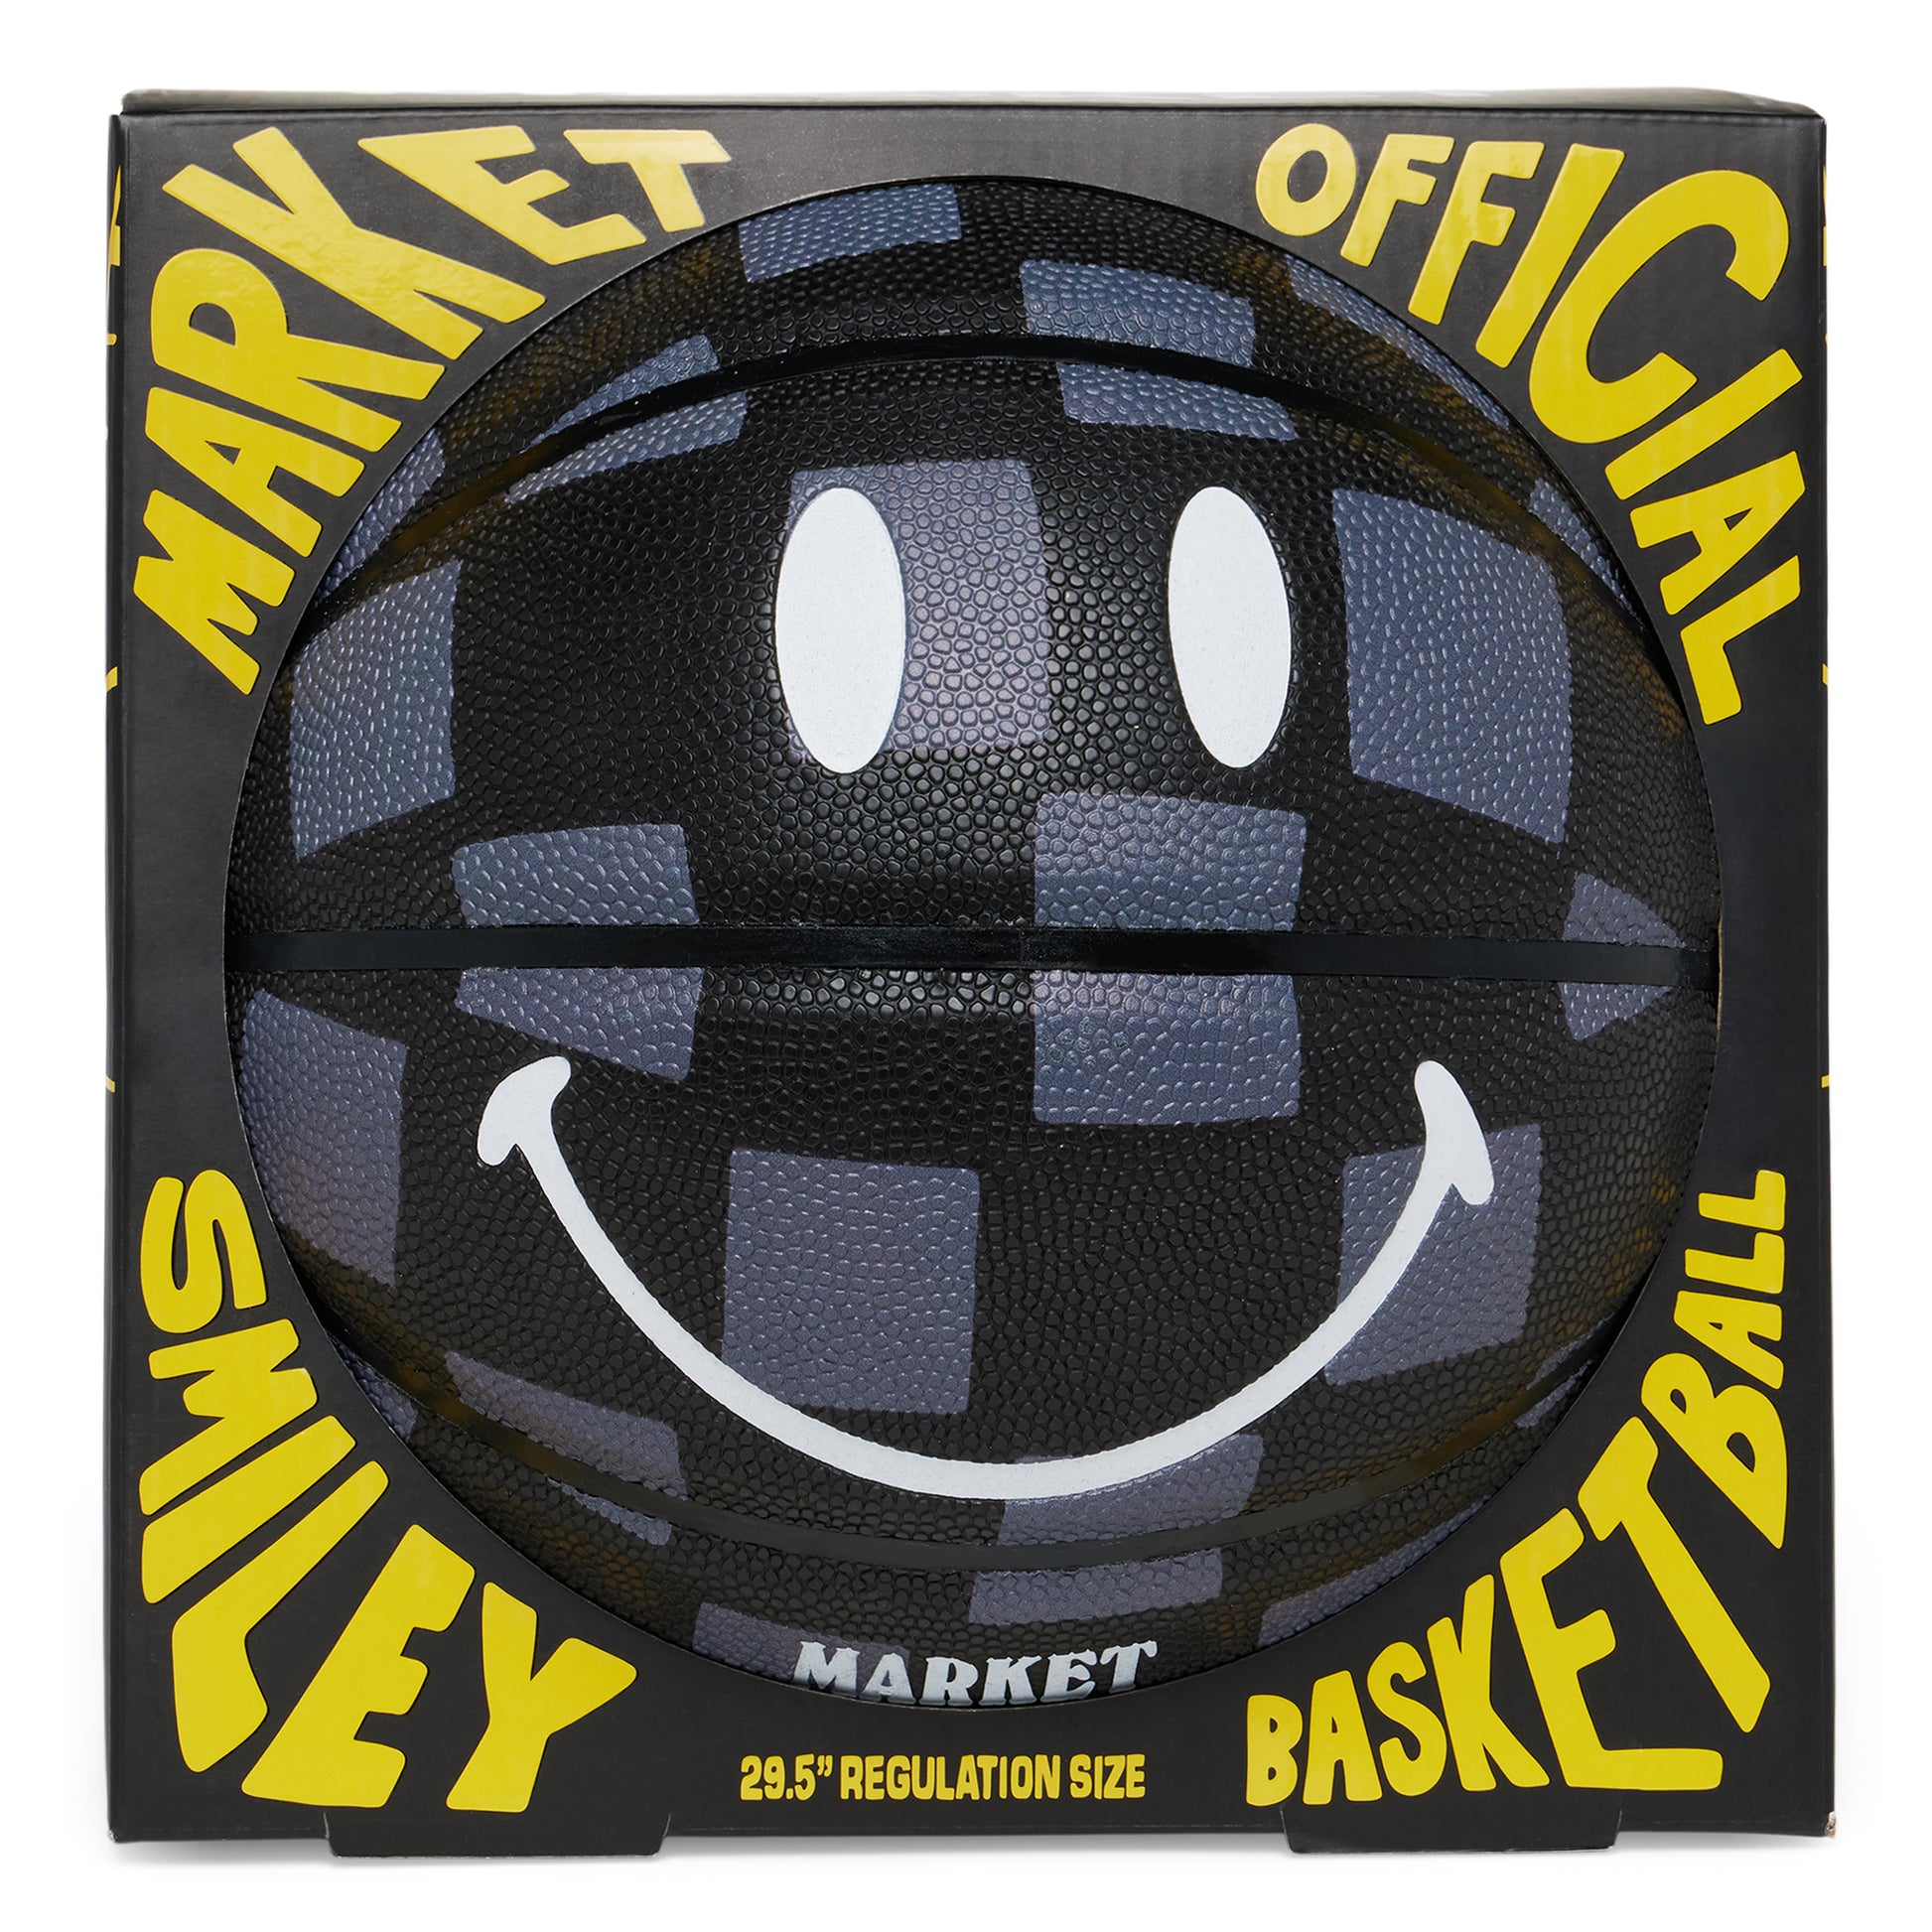 MARKET clothing brand SMILEY CHESS CLUB BASKETBALL. Find more basketballs, sporting goods, homegoods and graphic tees at MarketStudios.com. Formally Chinatown Market. 